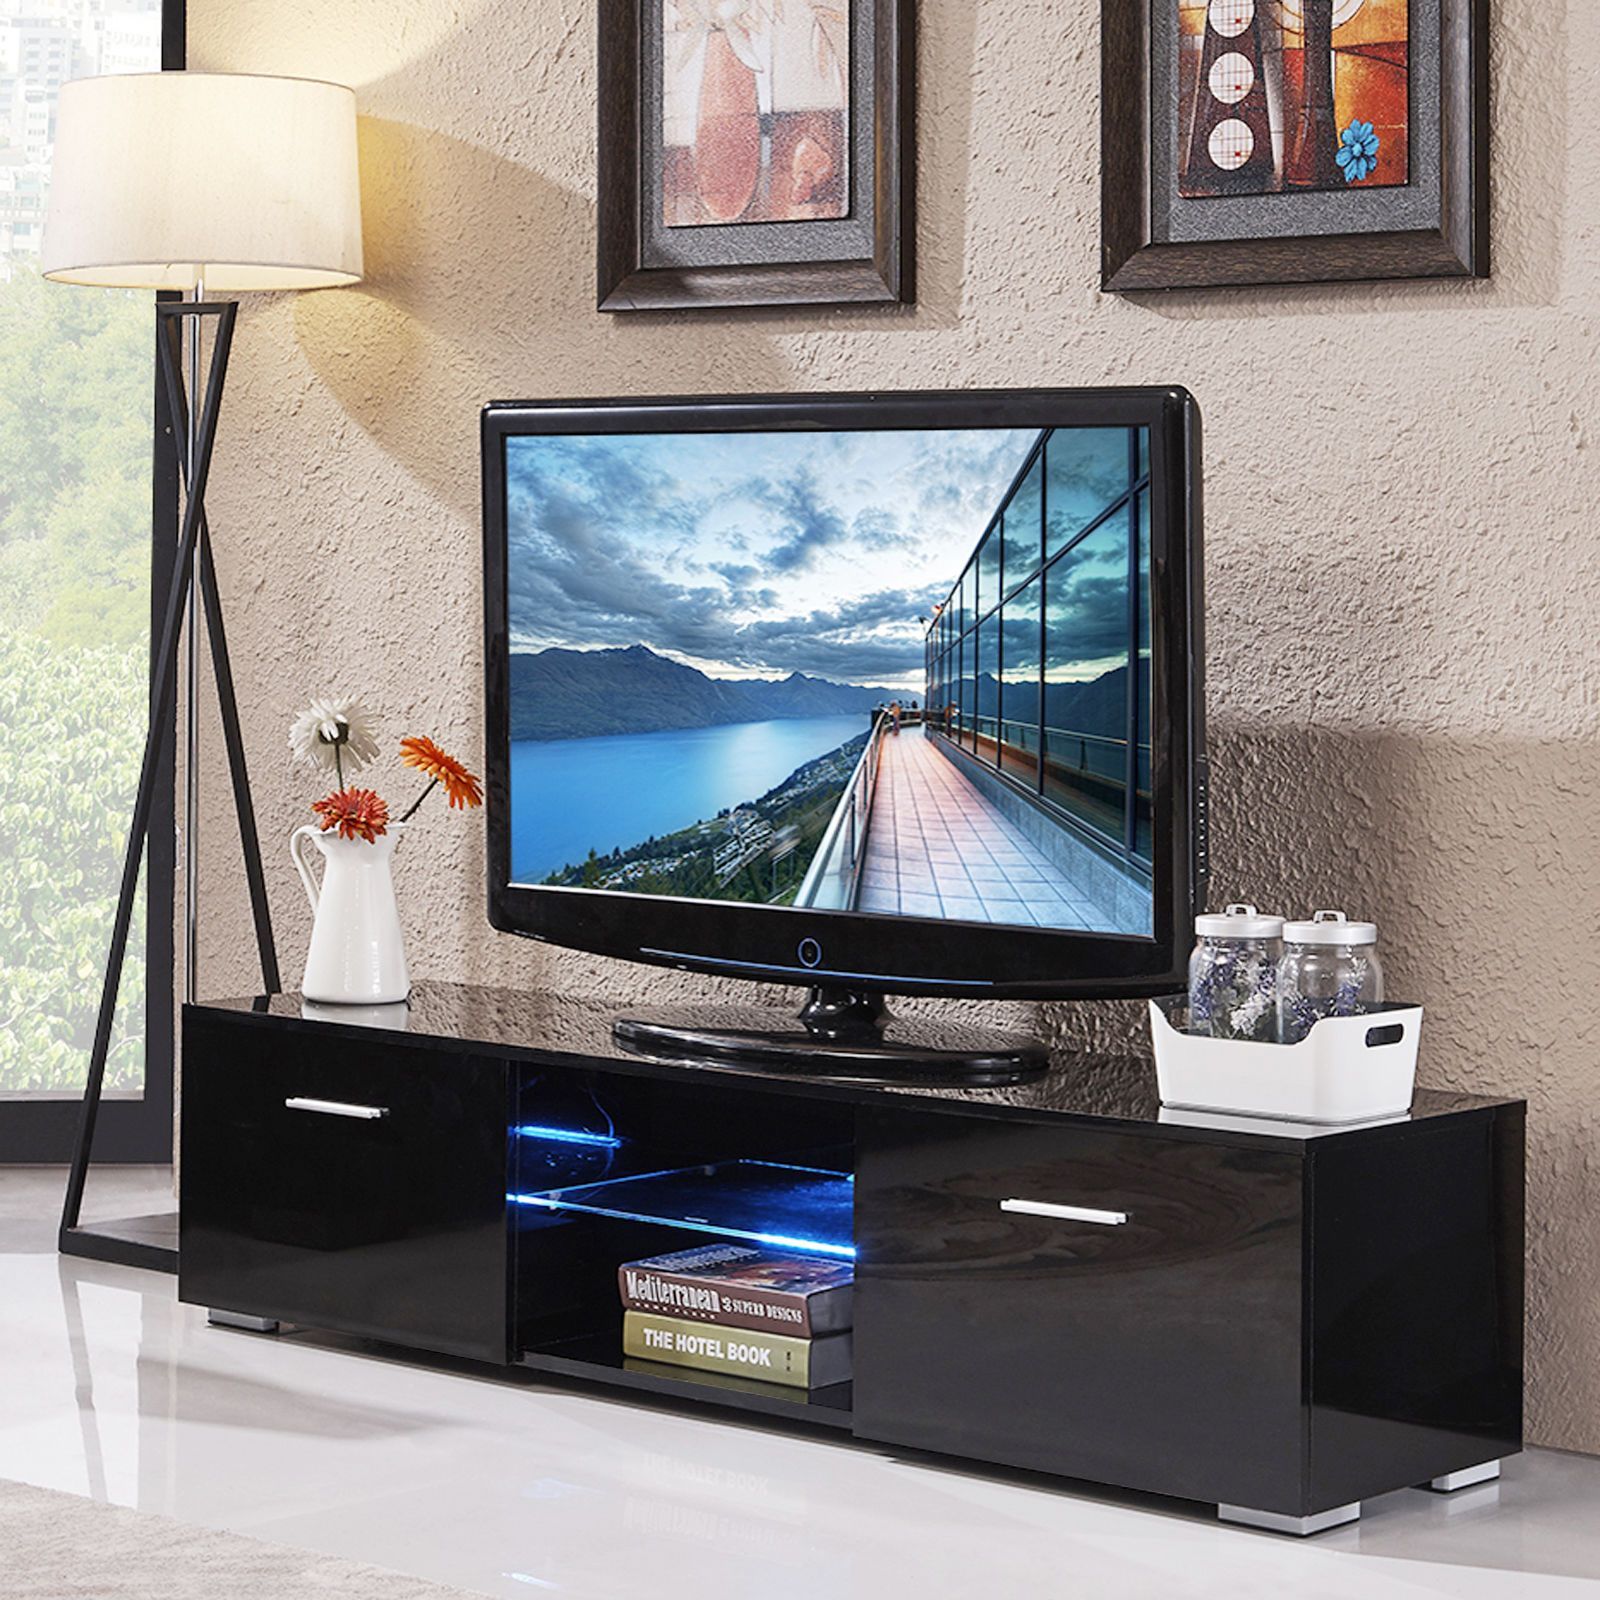 High Gloss Tv Stand Unit Cabinet Console Furniture W/led Shelves 2 Inside Led Tv Stands With Outlet (Gallery 10 of 20)